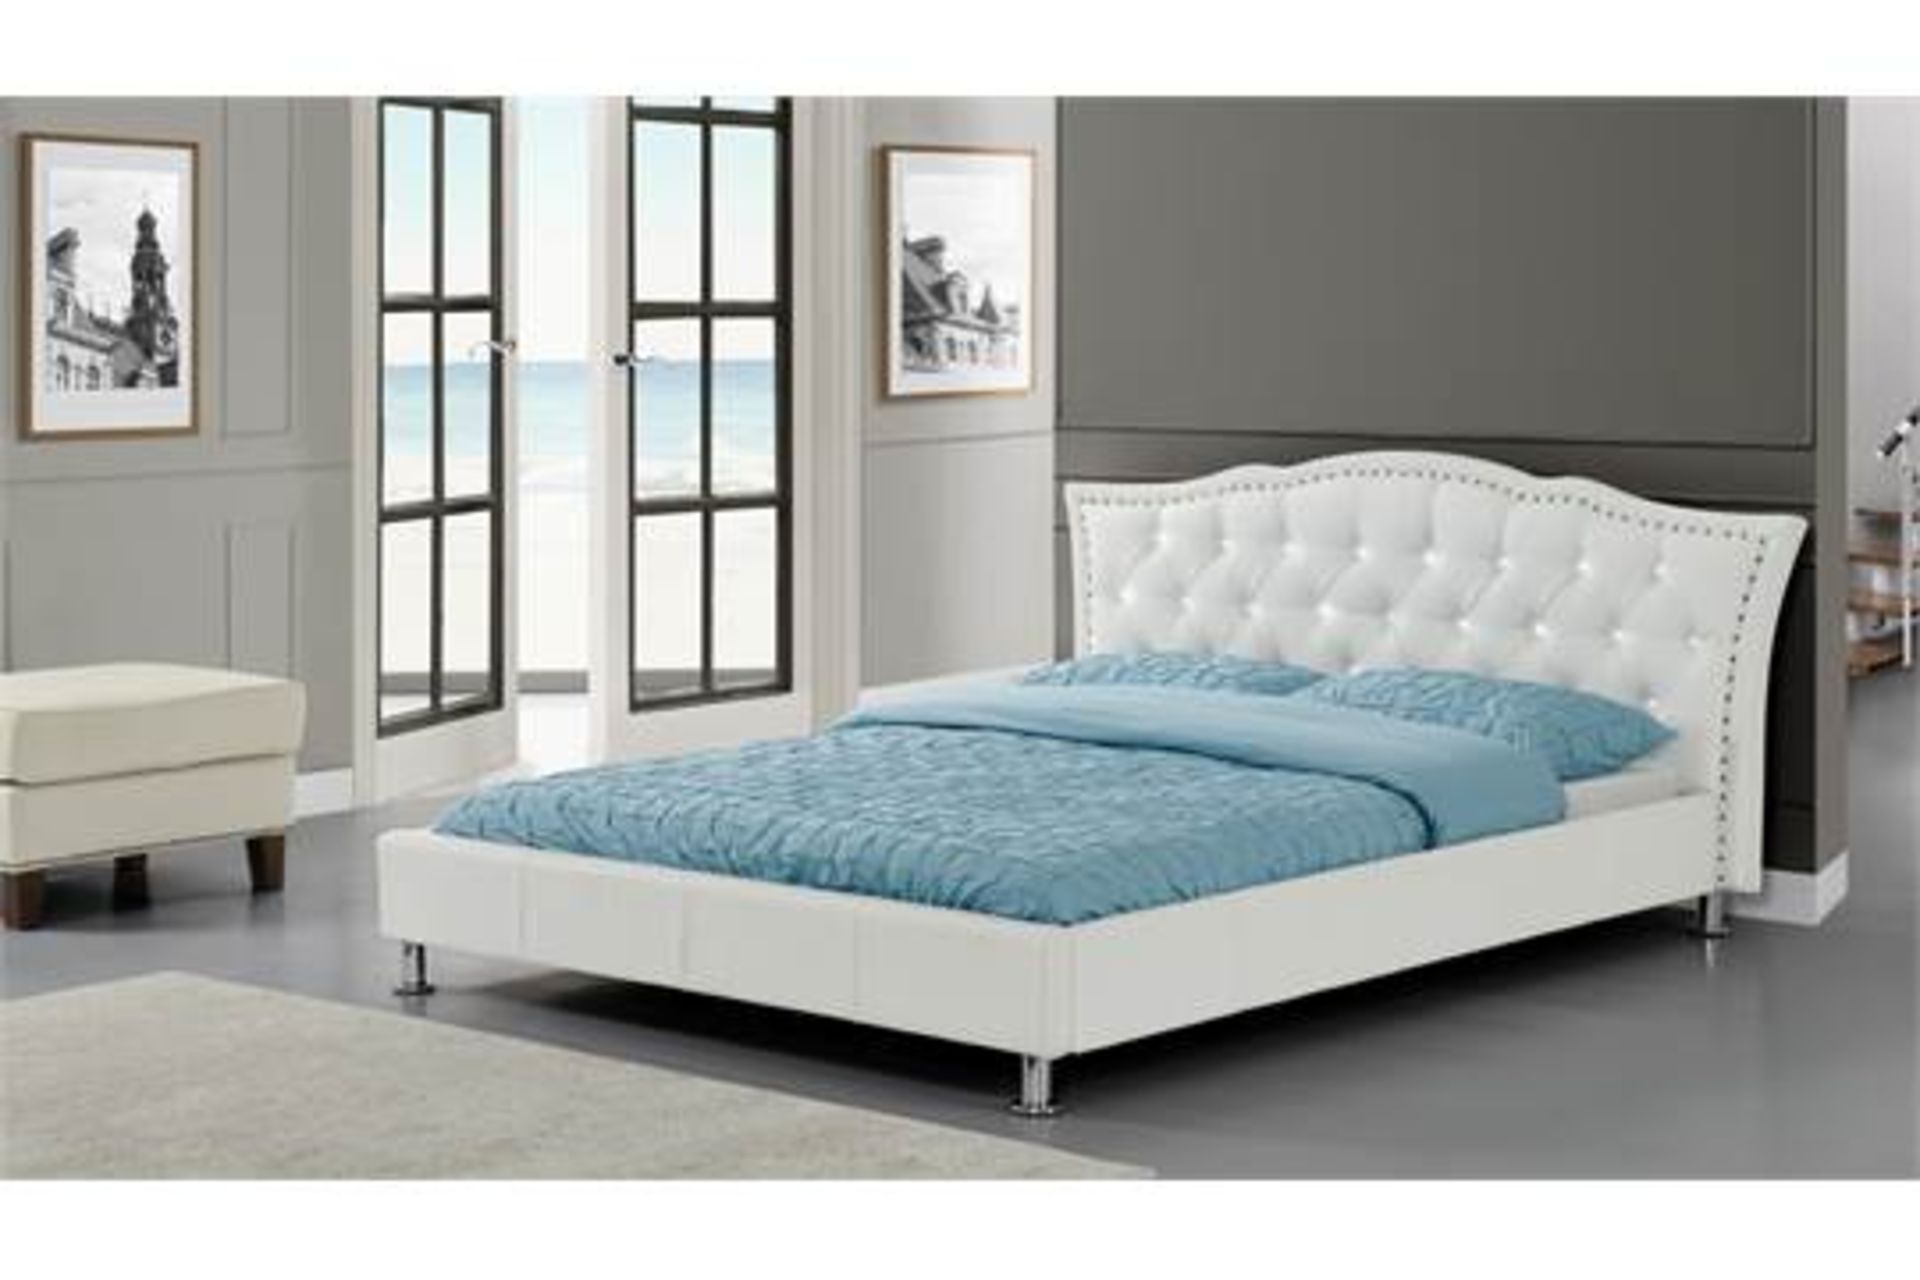 5X BOXED BRAND NEW KING SIZE BED RRP £339 EACH (SF845) (TLH-BED)